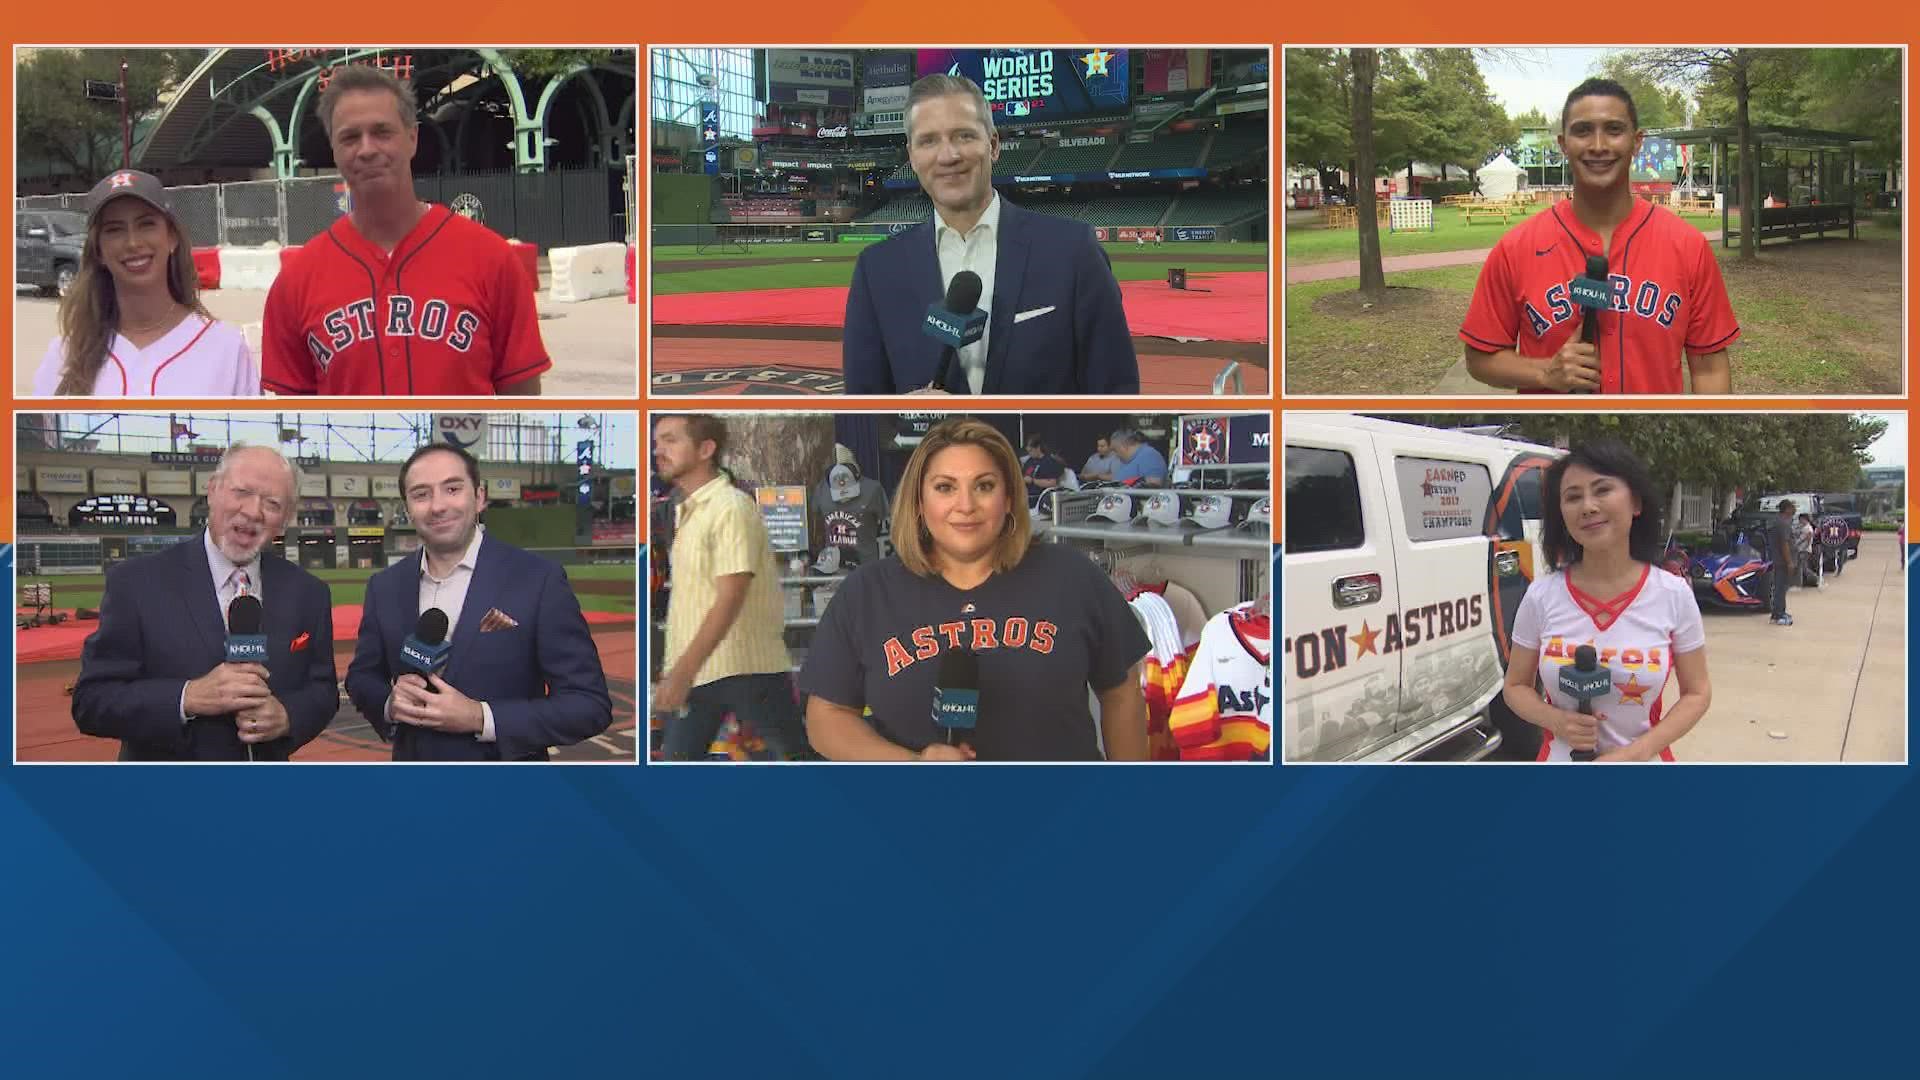 KHOU 11 is cheering on the Astros as they kick off the World Series against the Atlanta Braves. We'll be in and out of the stadium every step of the way!